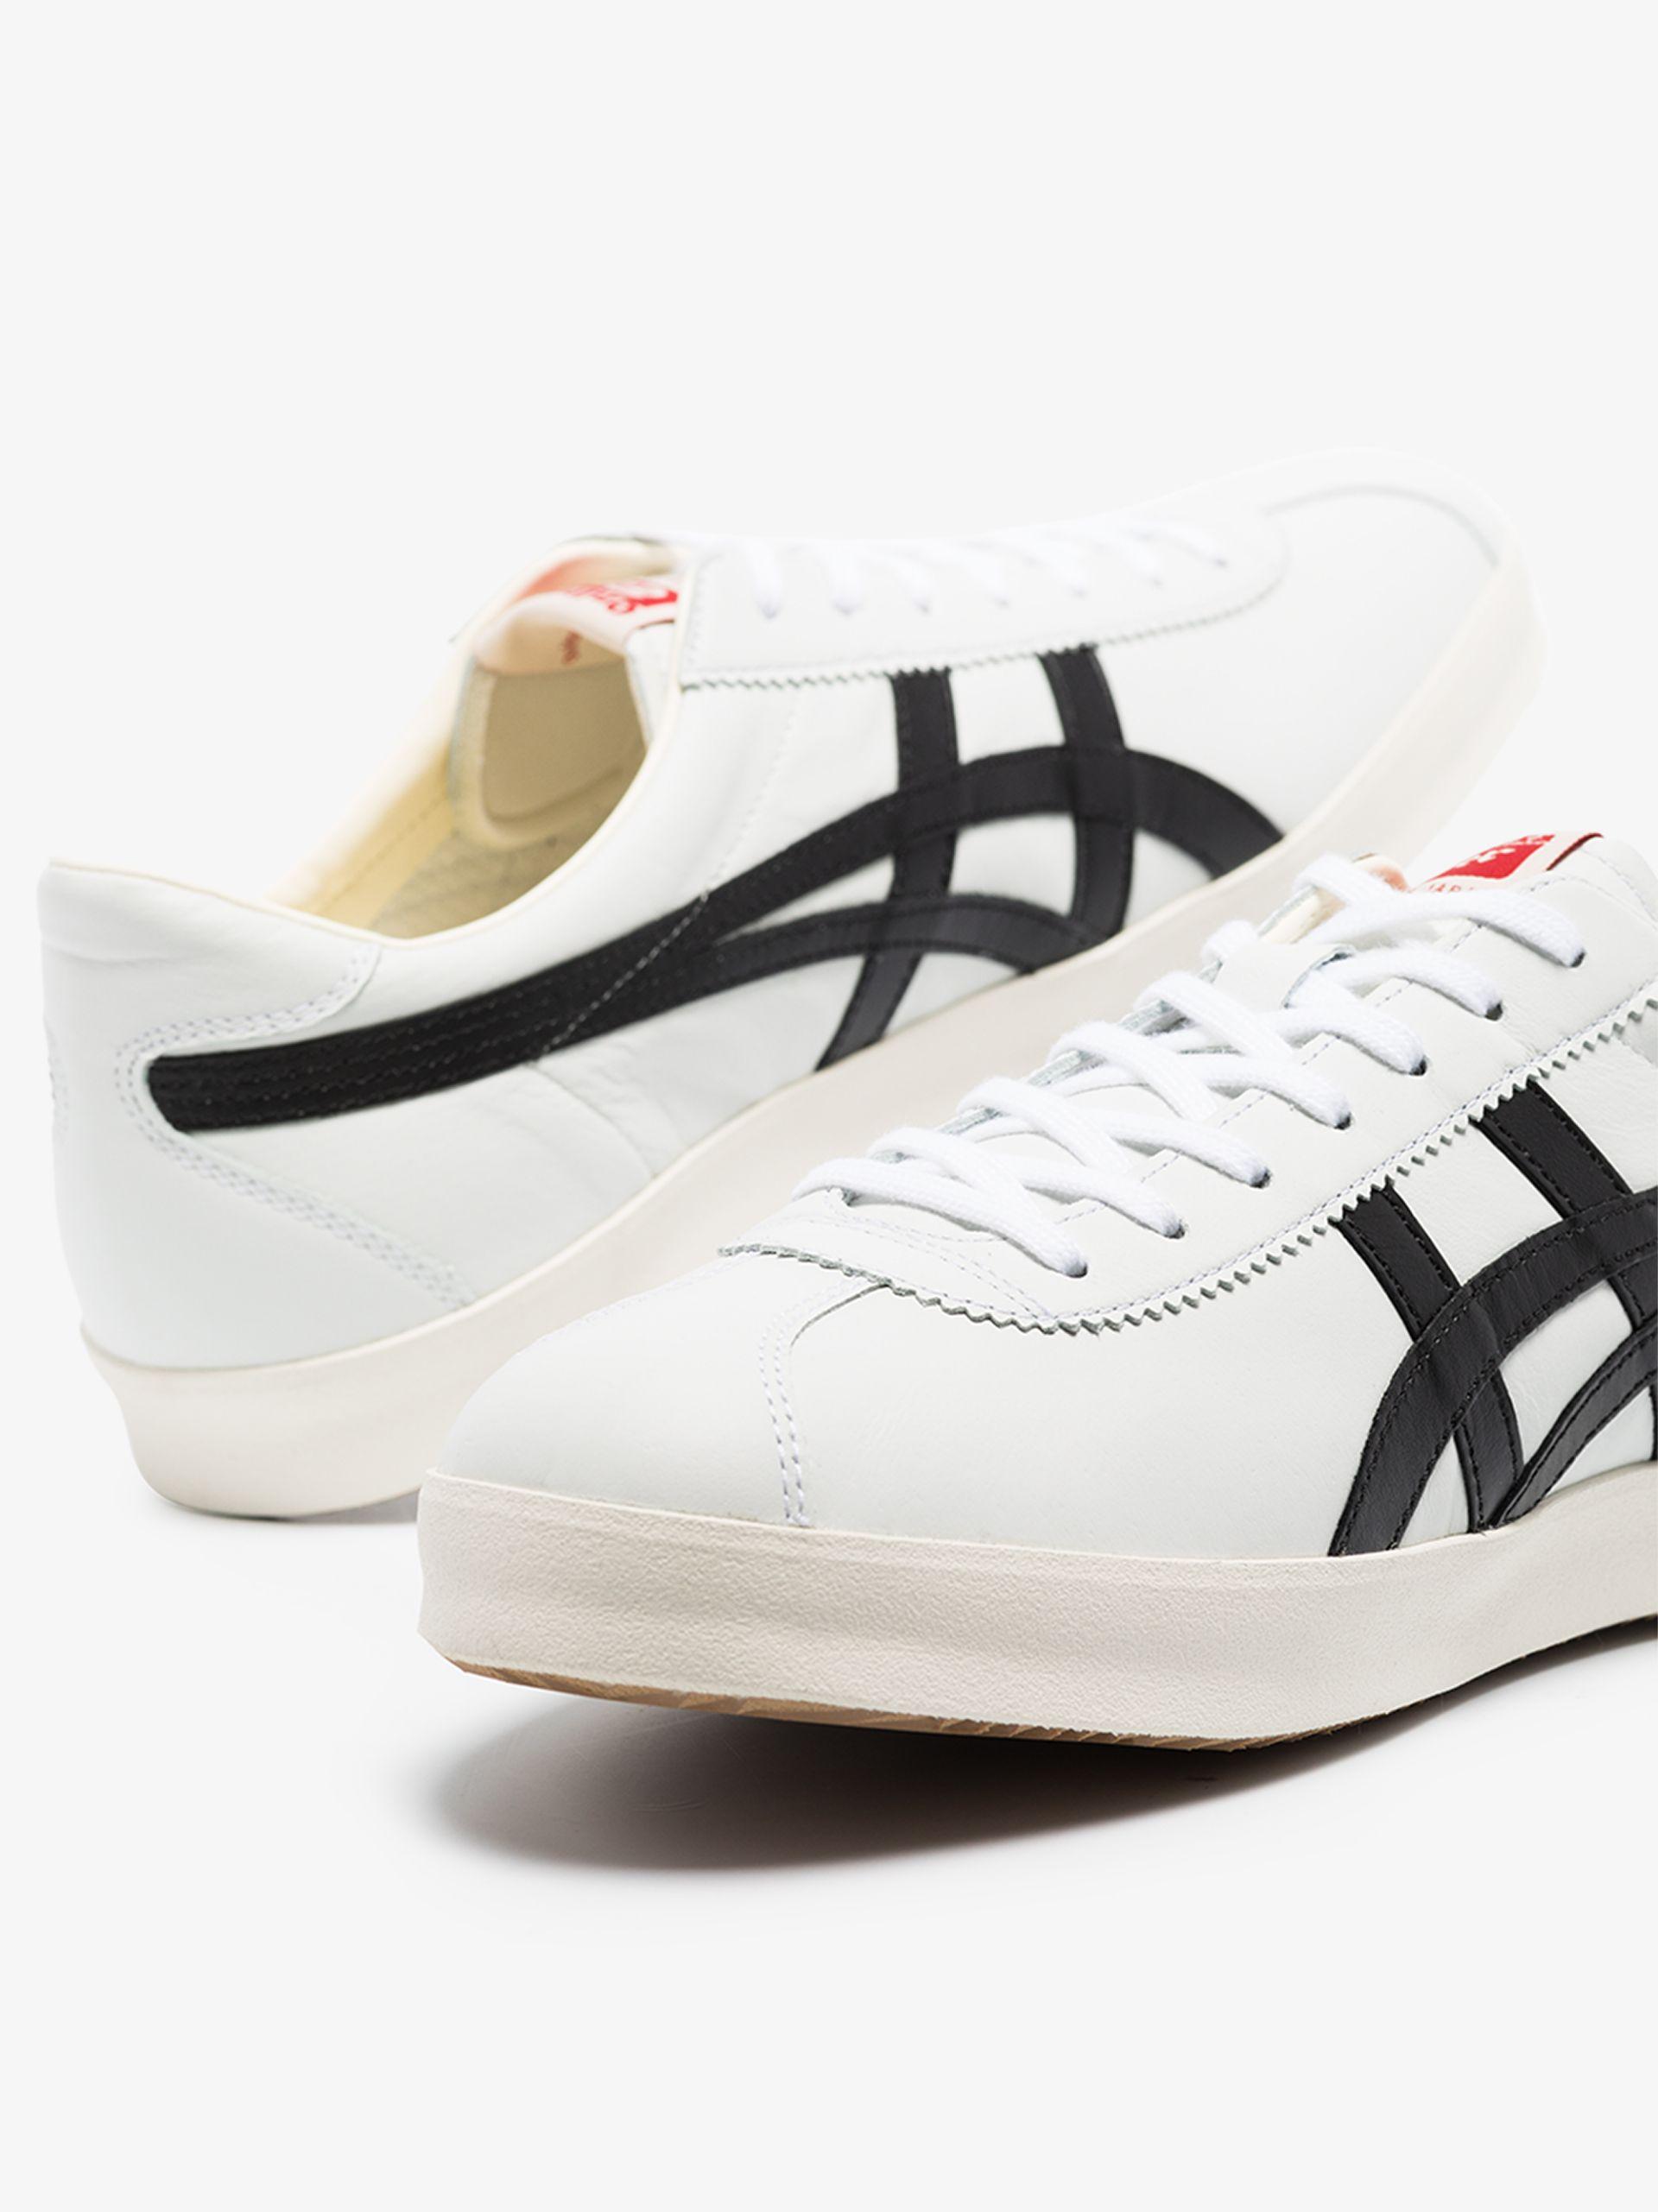 Onitsuka Tiger Leather White Vickka Nm Sneakers for Men | Lyst